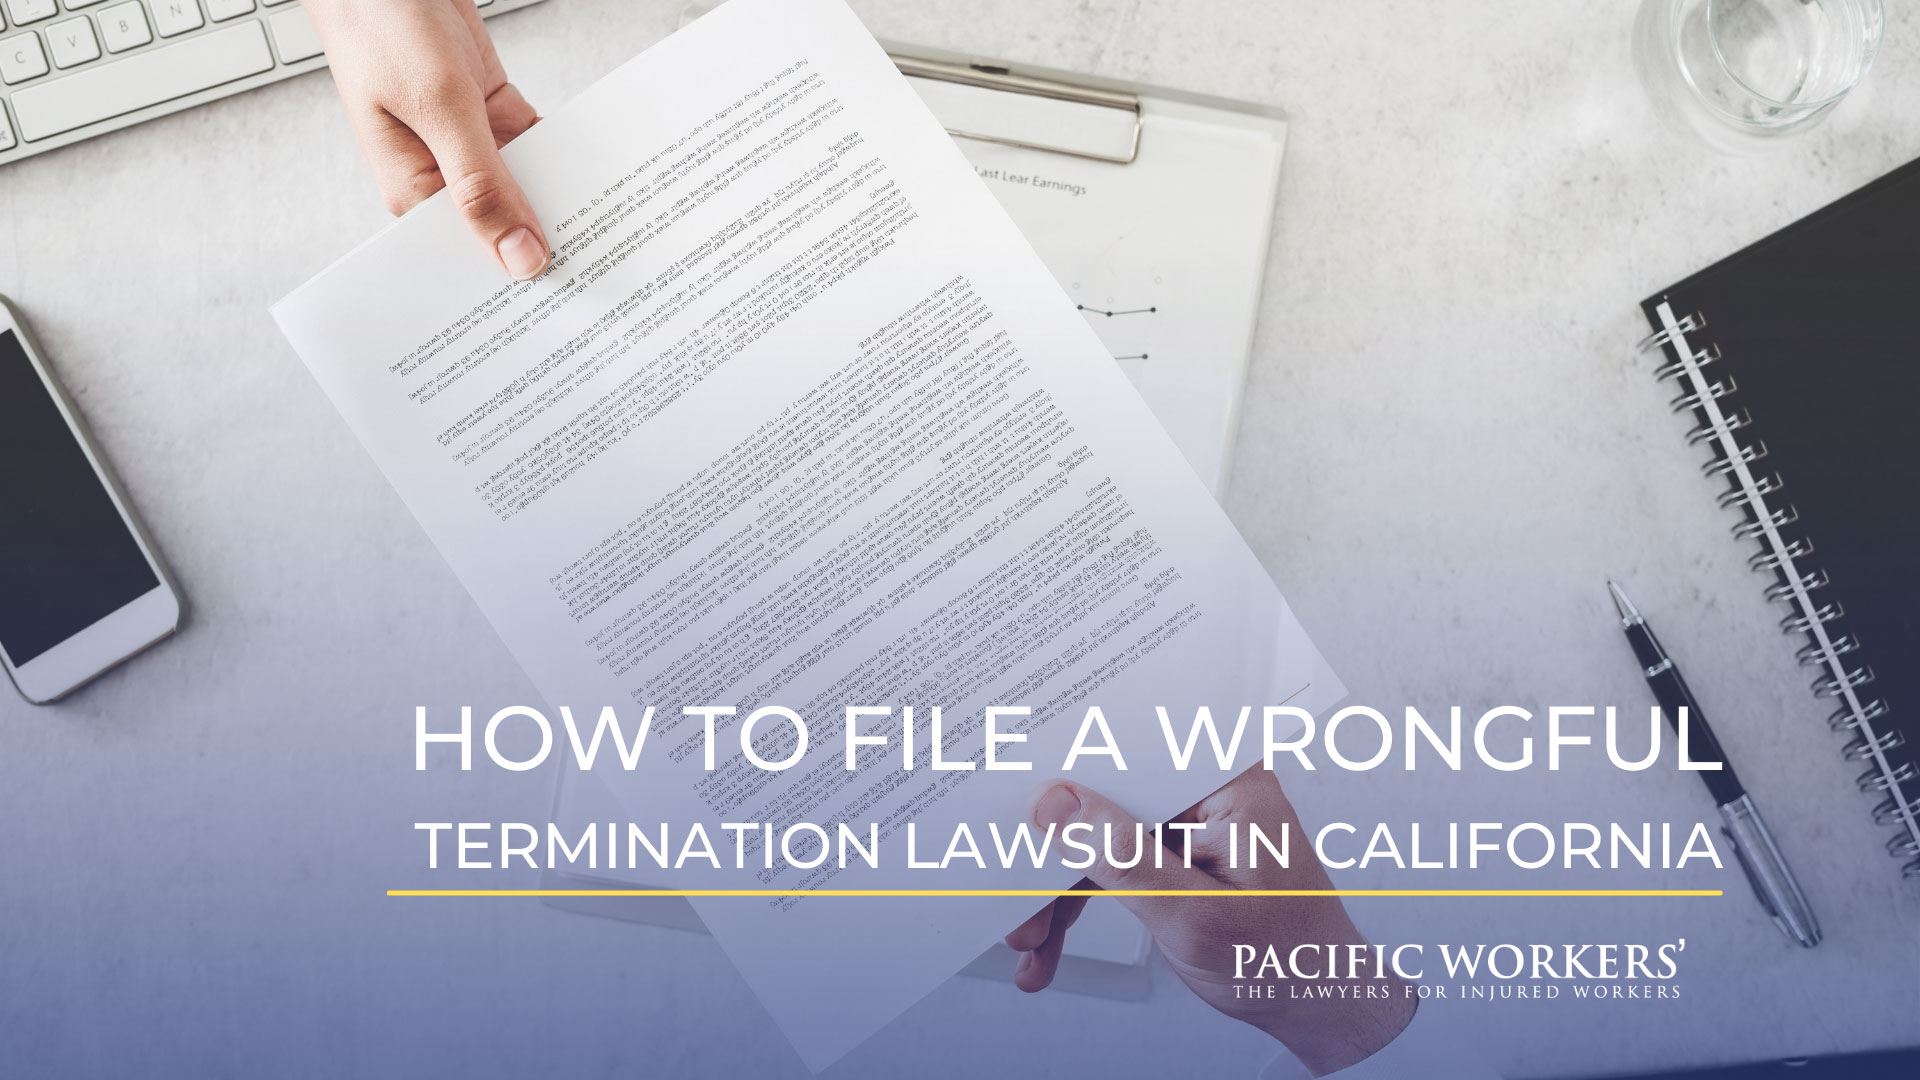 How to File a Wrongful Termination Lawsuit in California